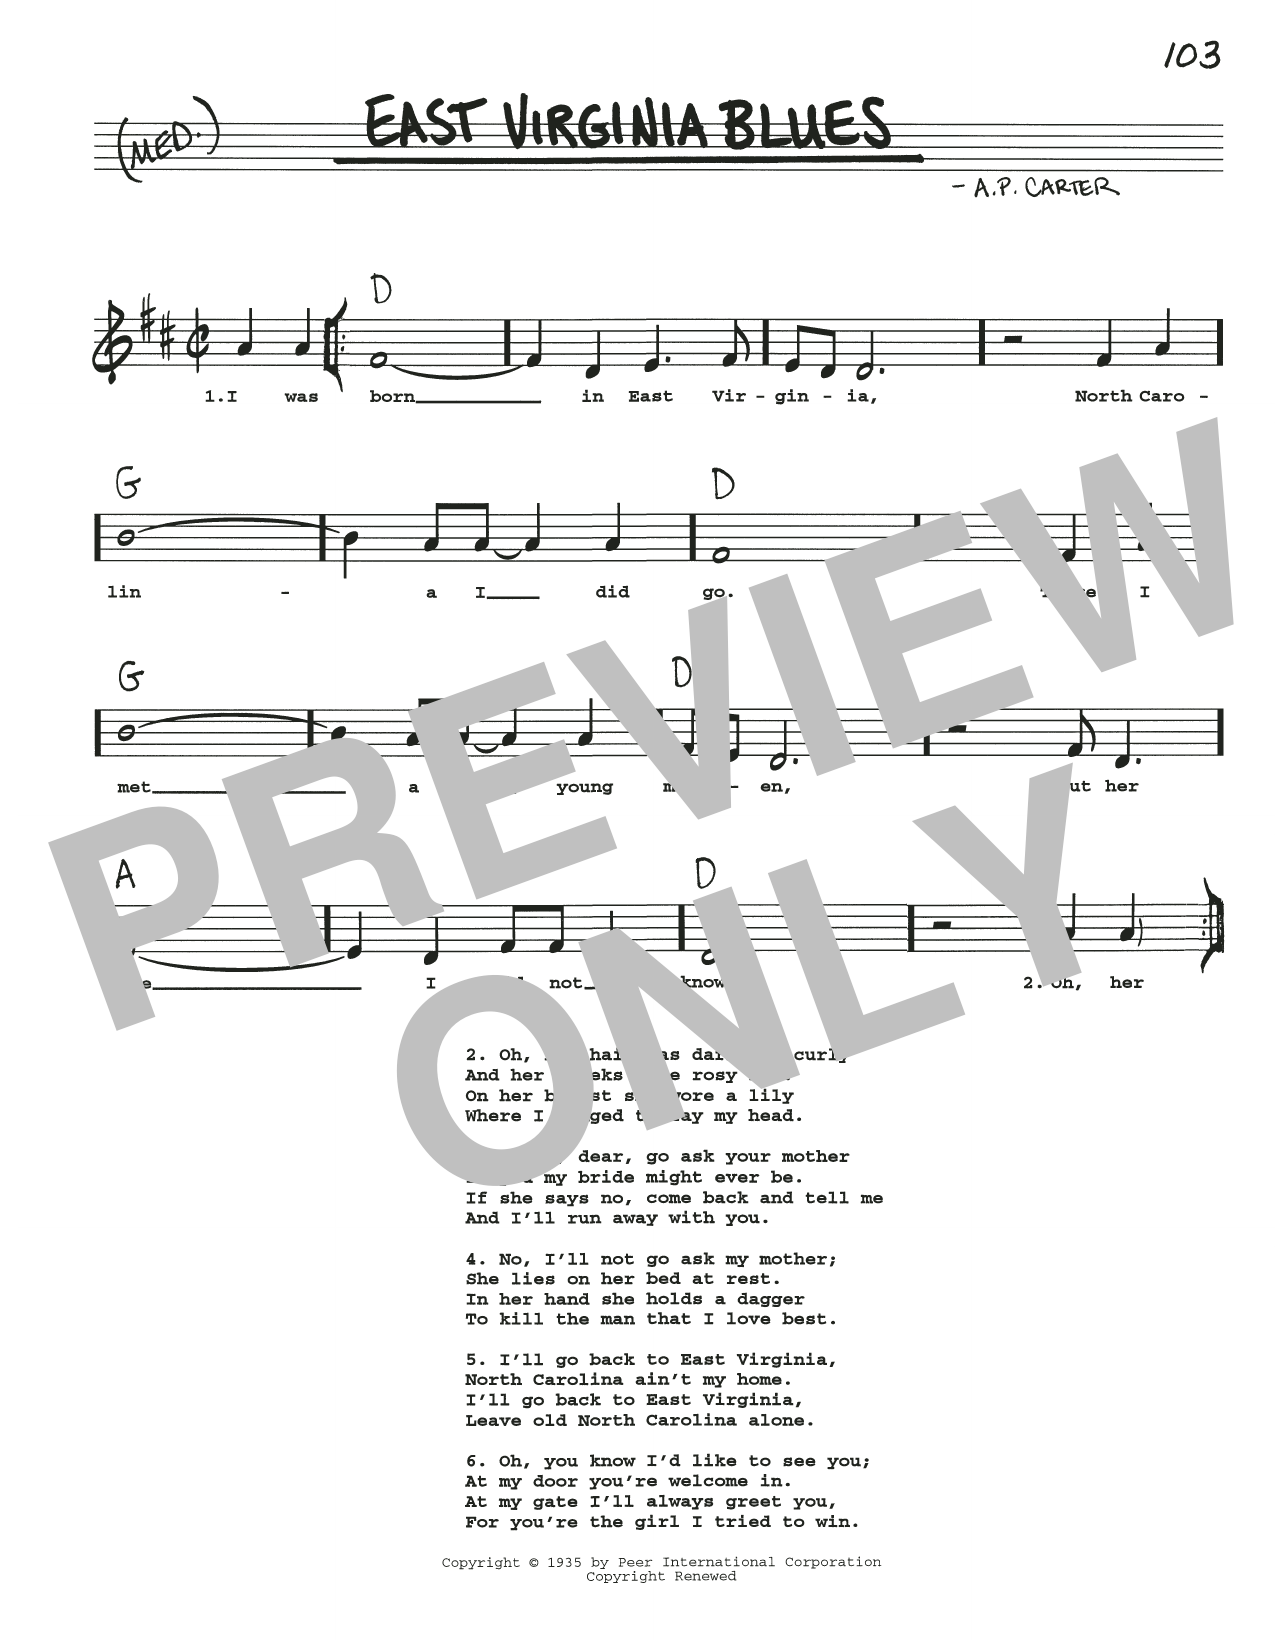 Download The Carter Family East Virginia Blues Sheet Music